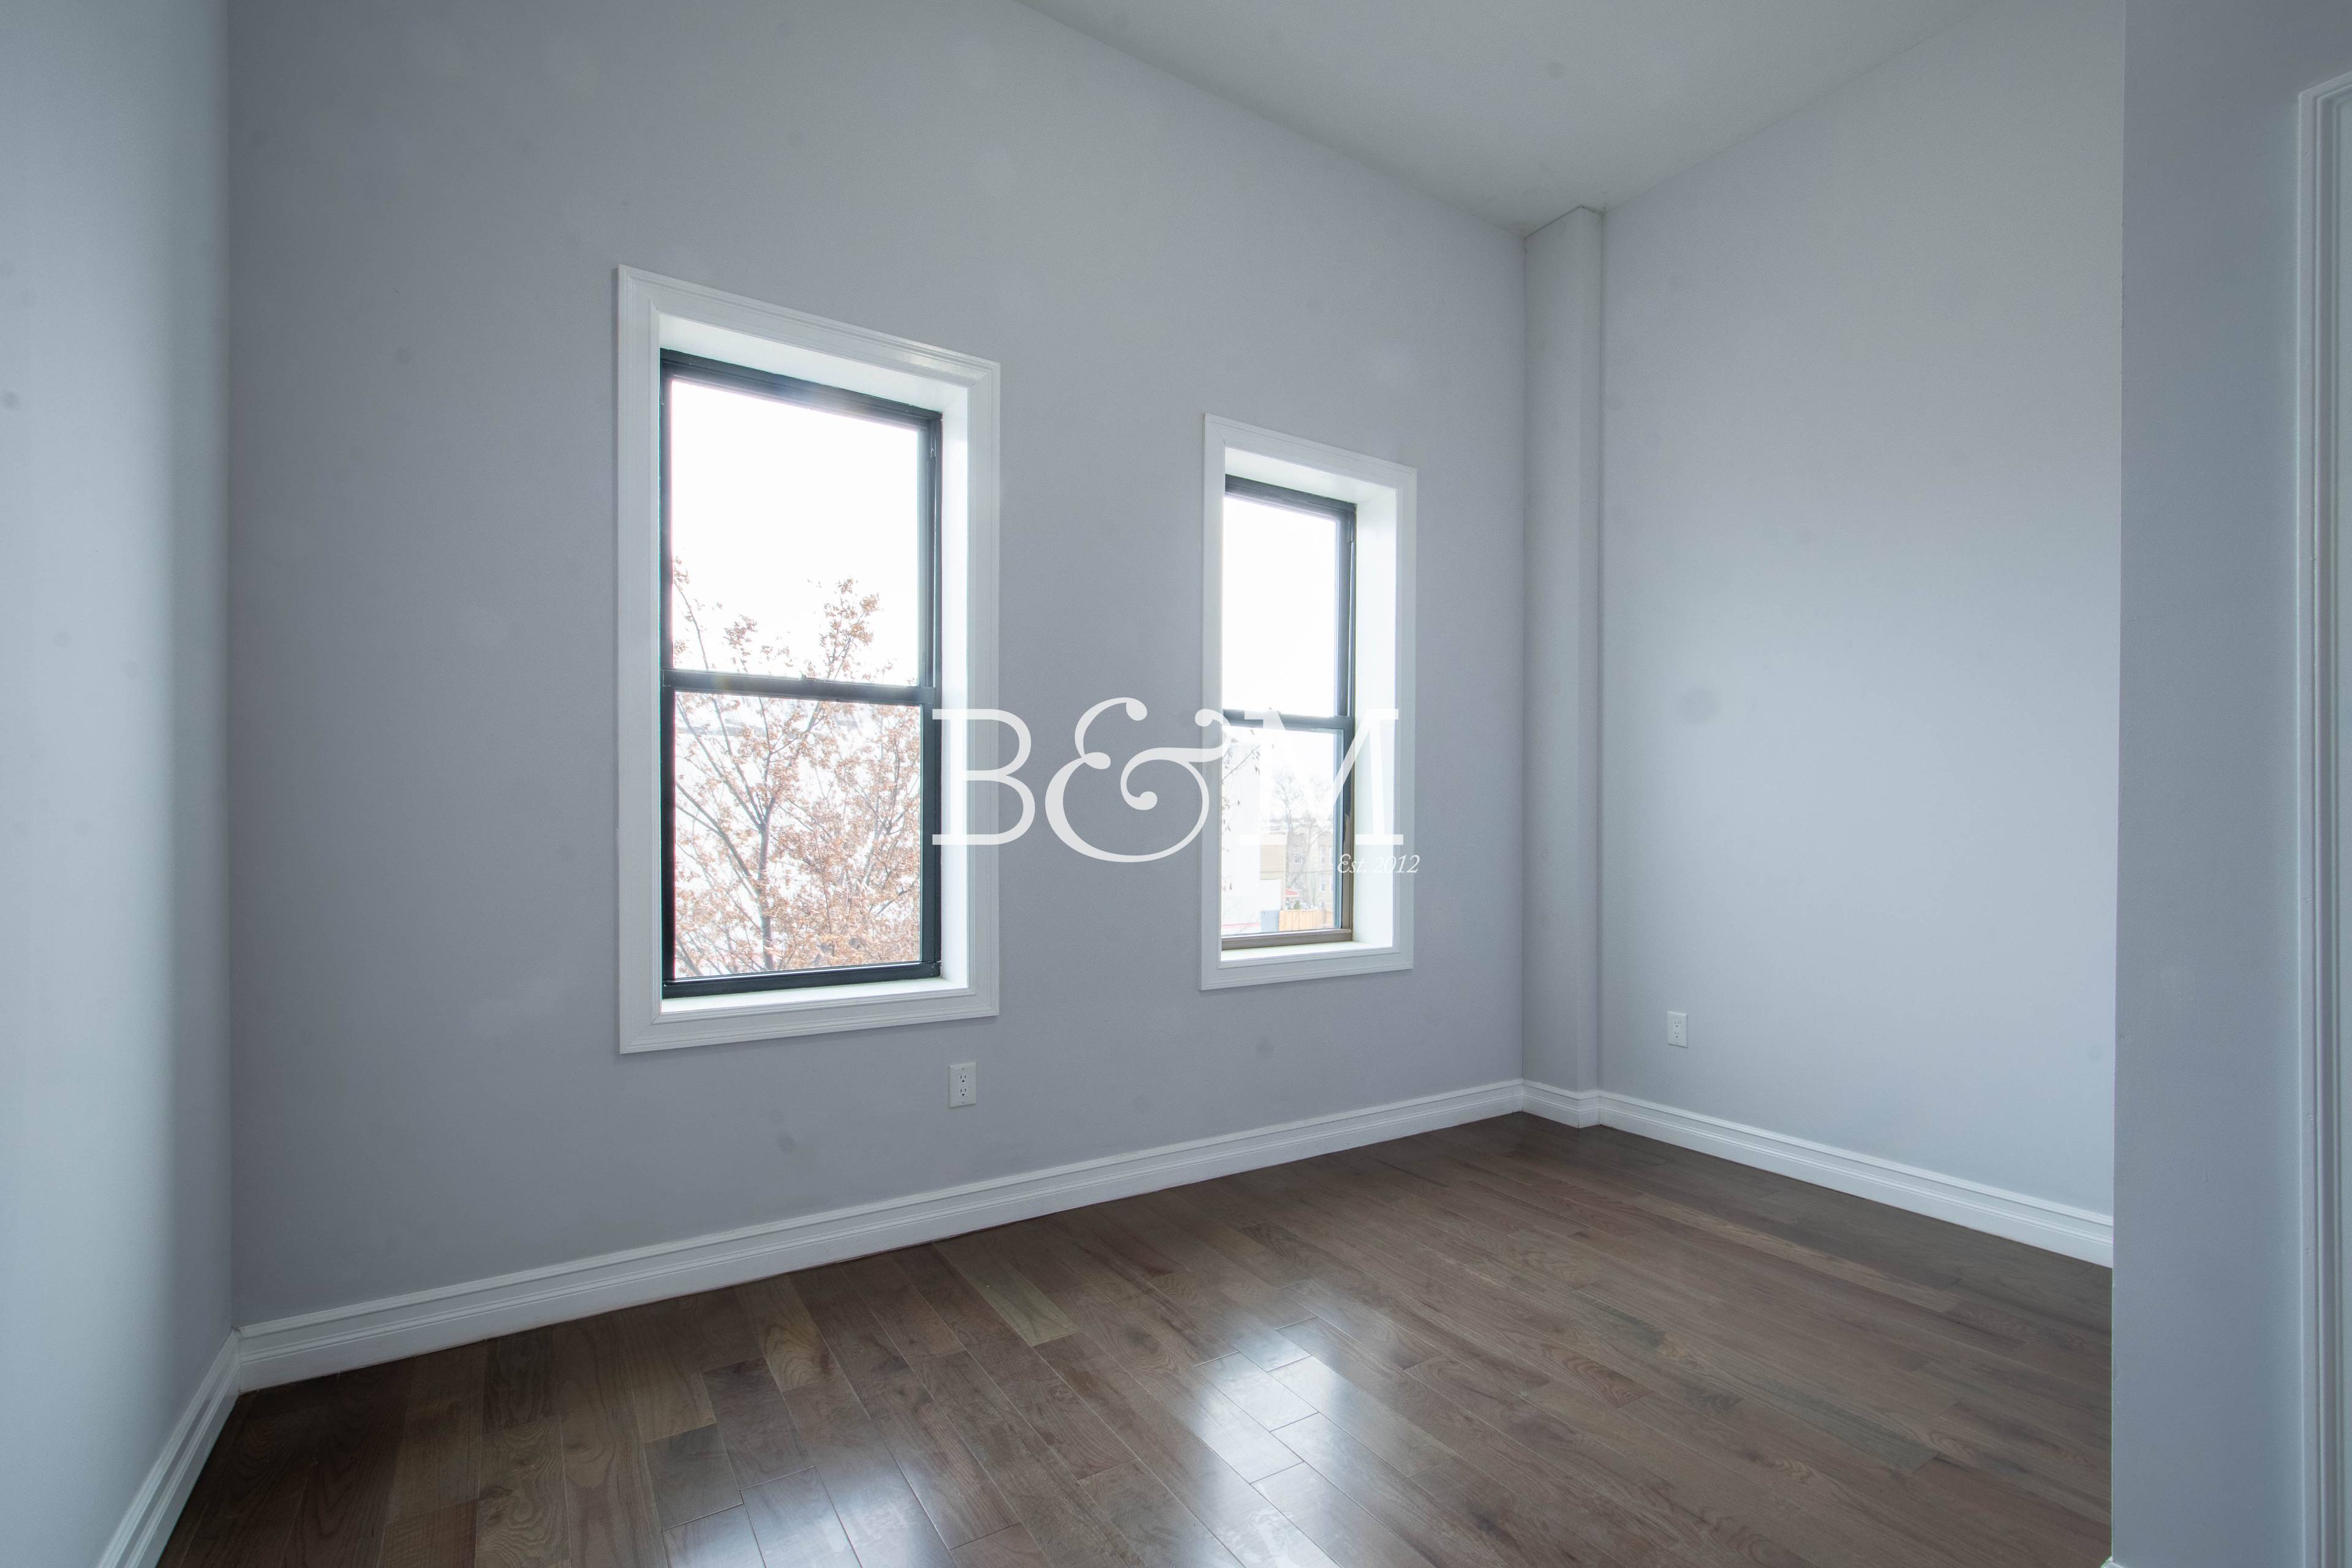 Brand new units with modern finishes in a well appointed pre war building on Fresh Pond Road.